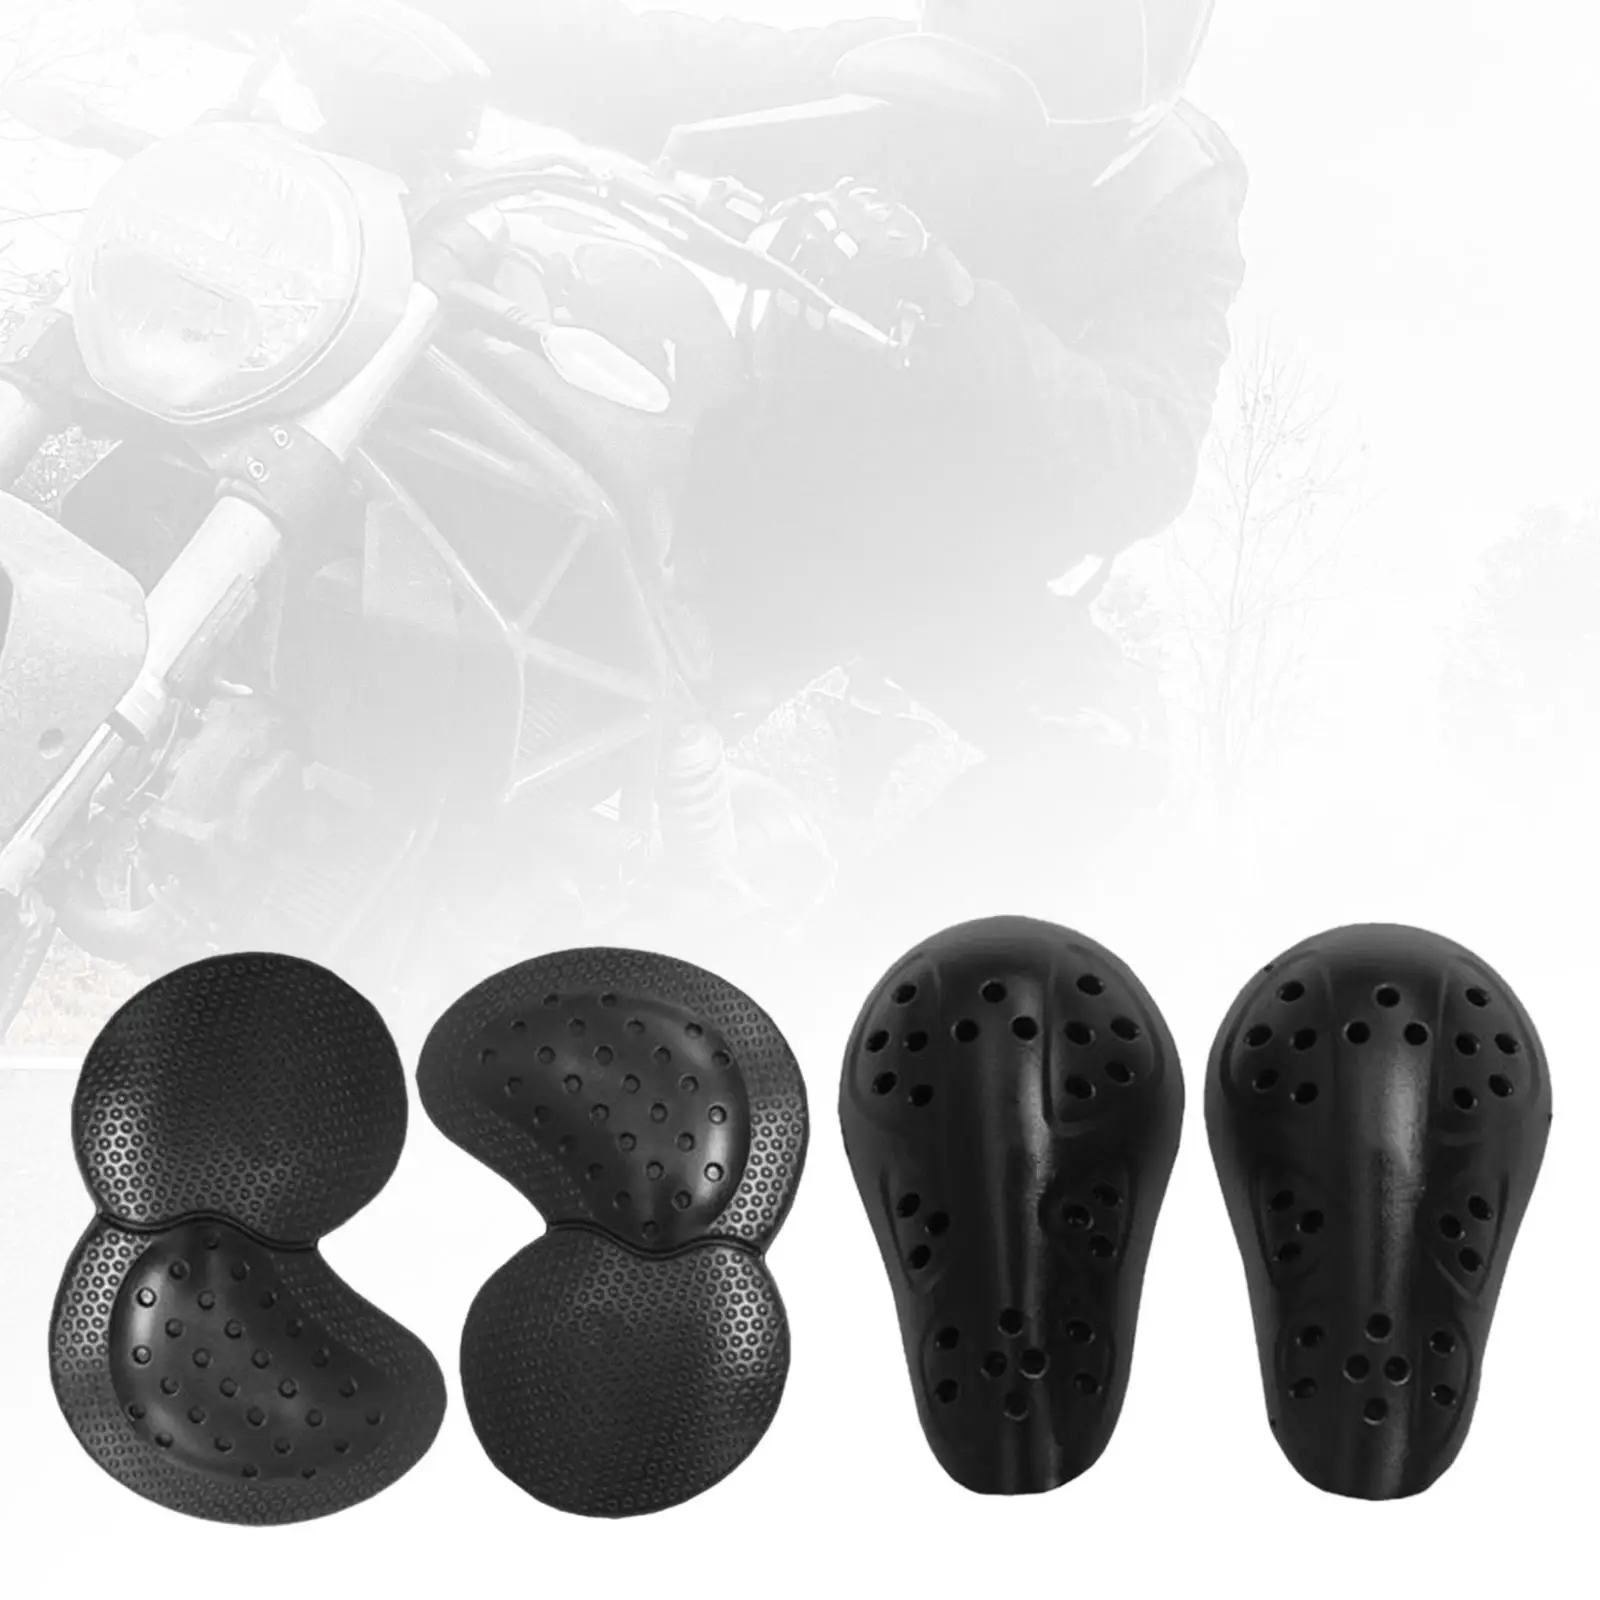 Motorcycle Motorcycle Biker Riding Lightweight Breathable Motorcycle Accessories